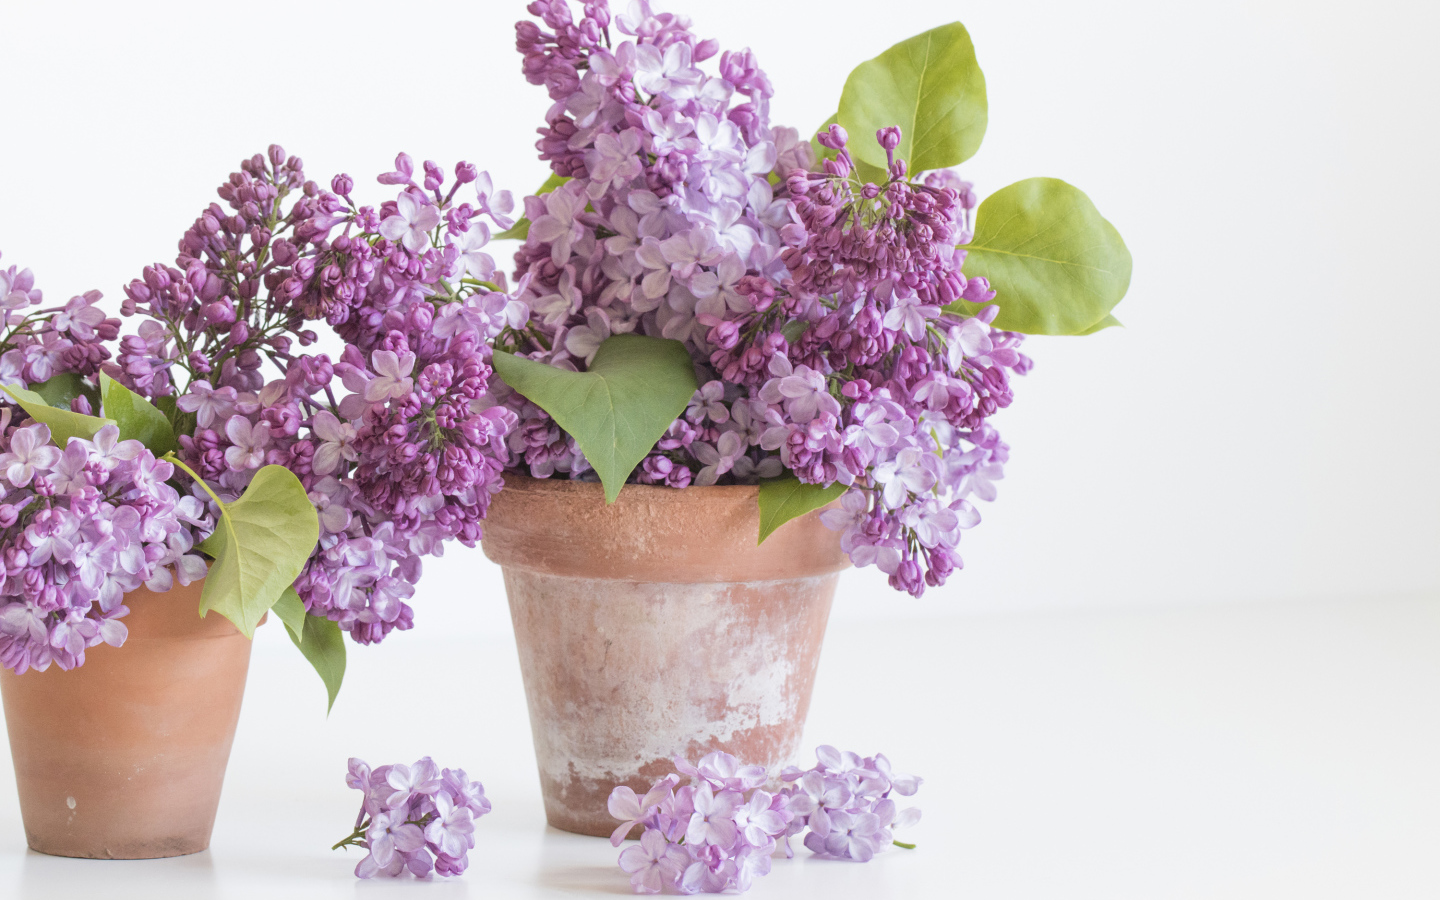 Lilac flowers in pots on a white background